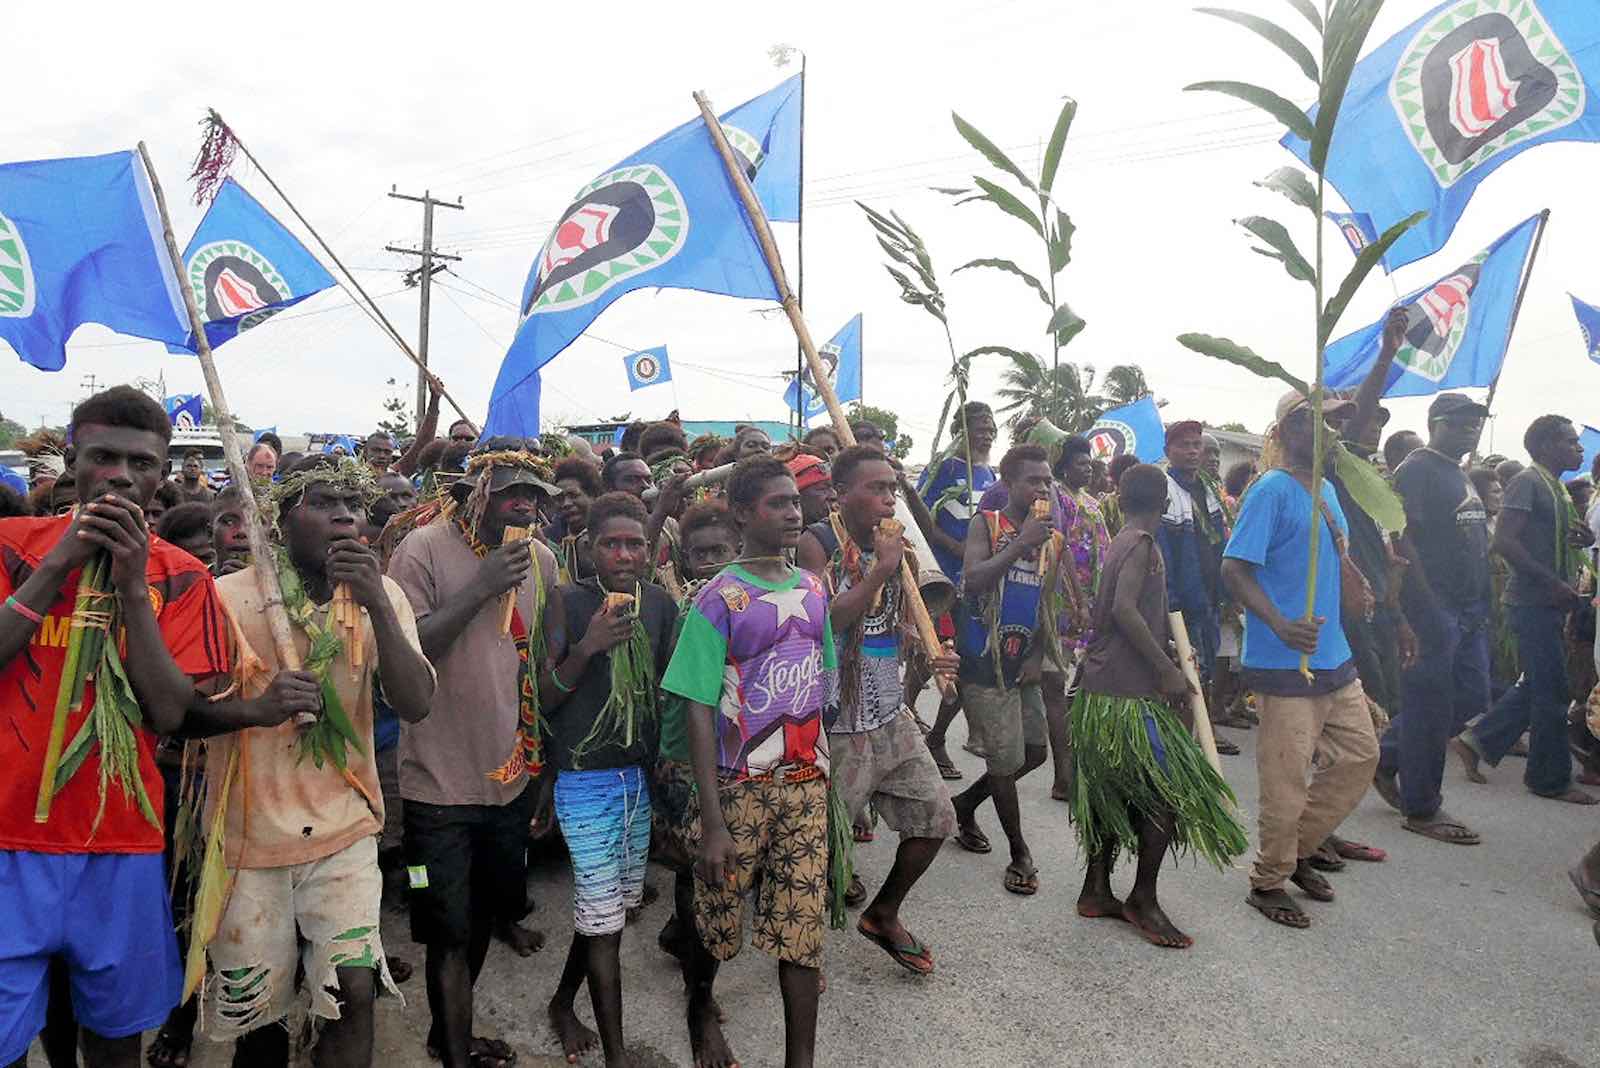 Scene at a polling station in Buka during the Bougainville Independence Referendum, 22 November (Photo: The Asahi Shimbun/Getty Images)